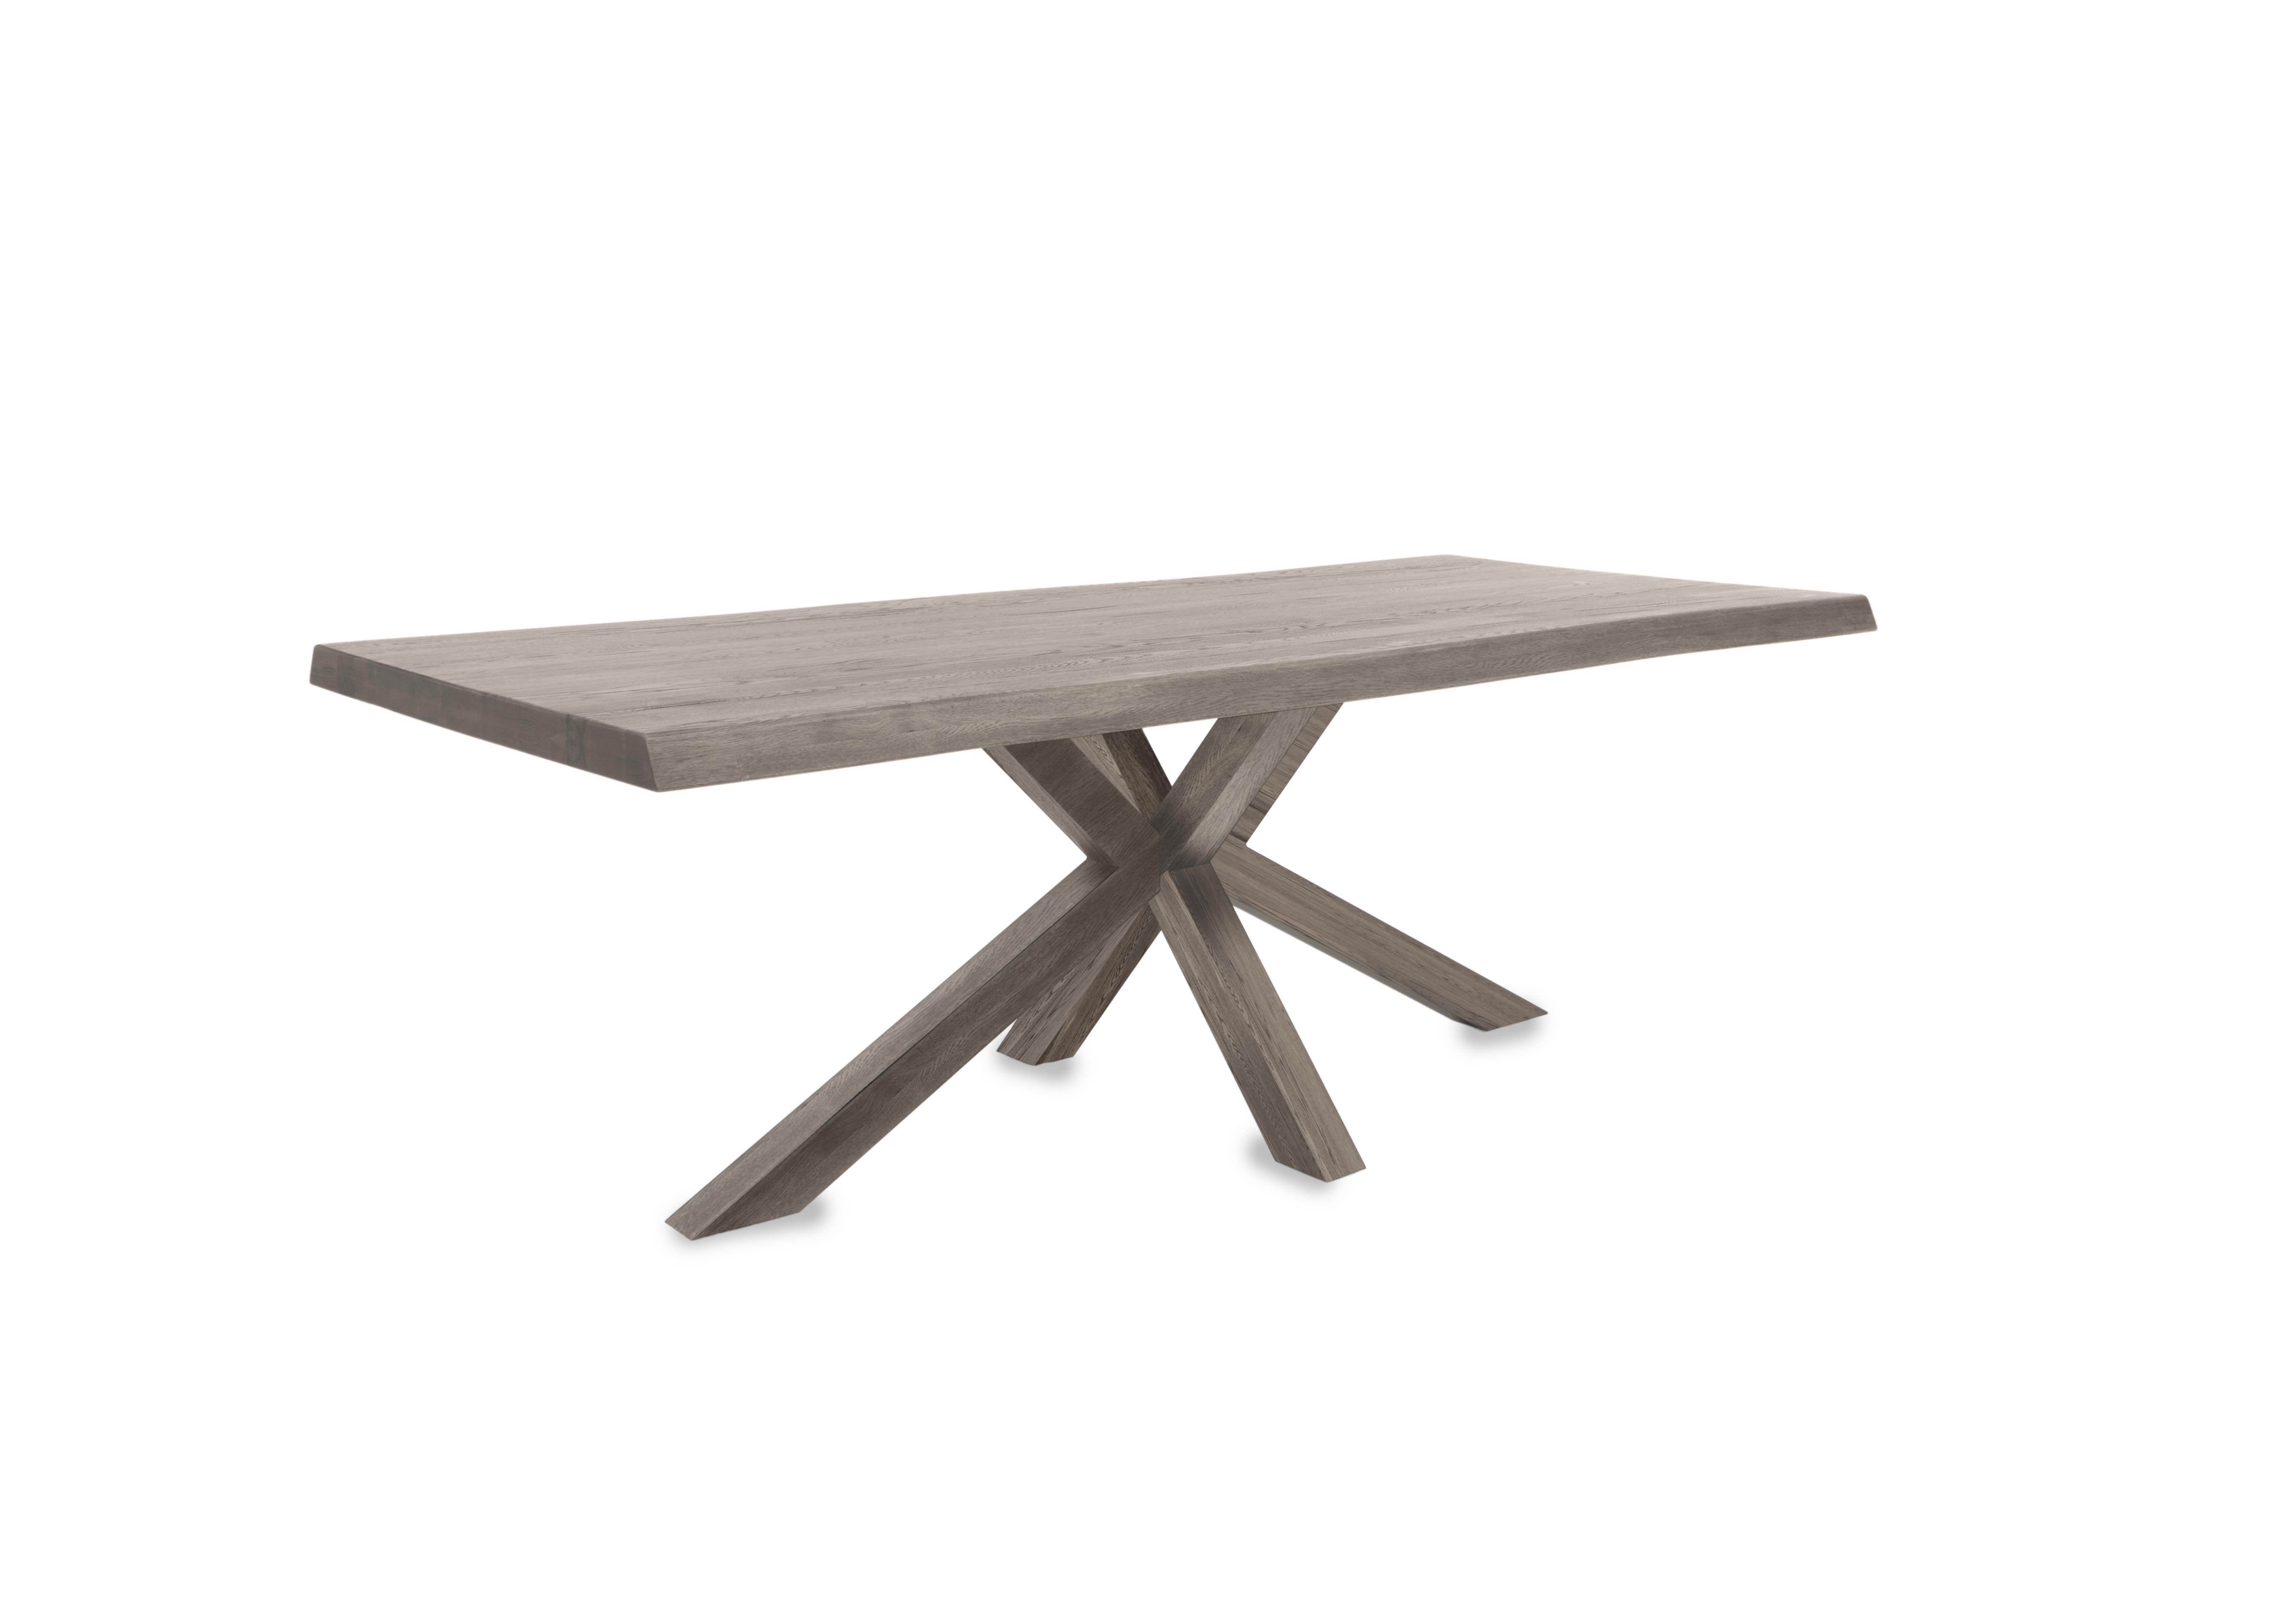 Njord Raw Edge Dining Table with Wood Star Base in White Washed on Furniture Village